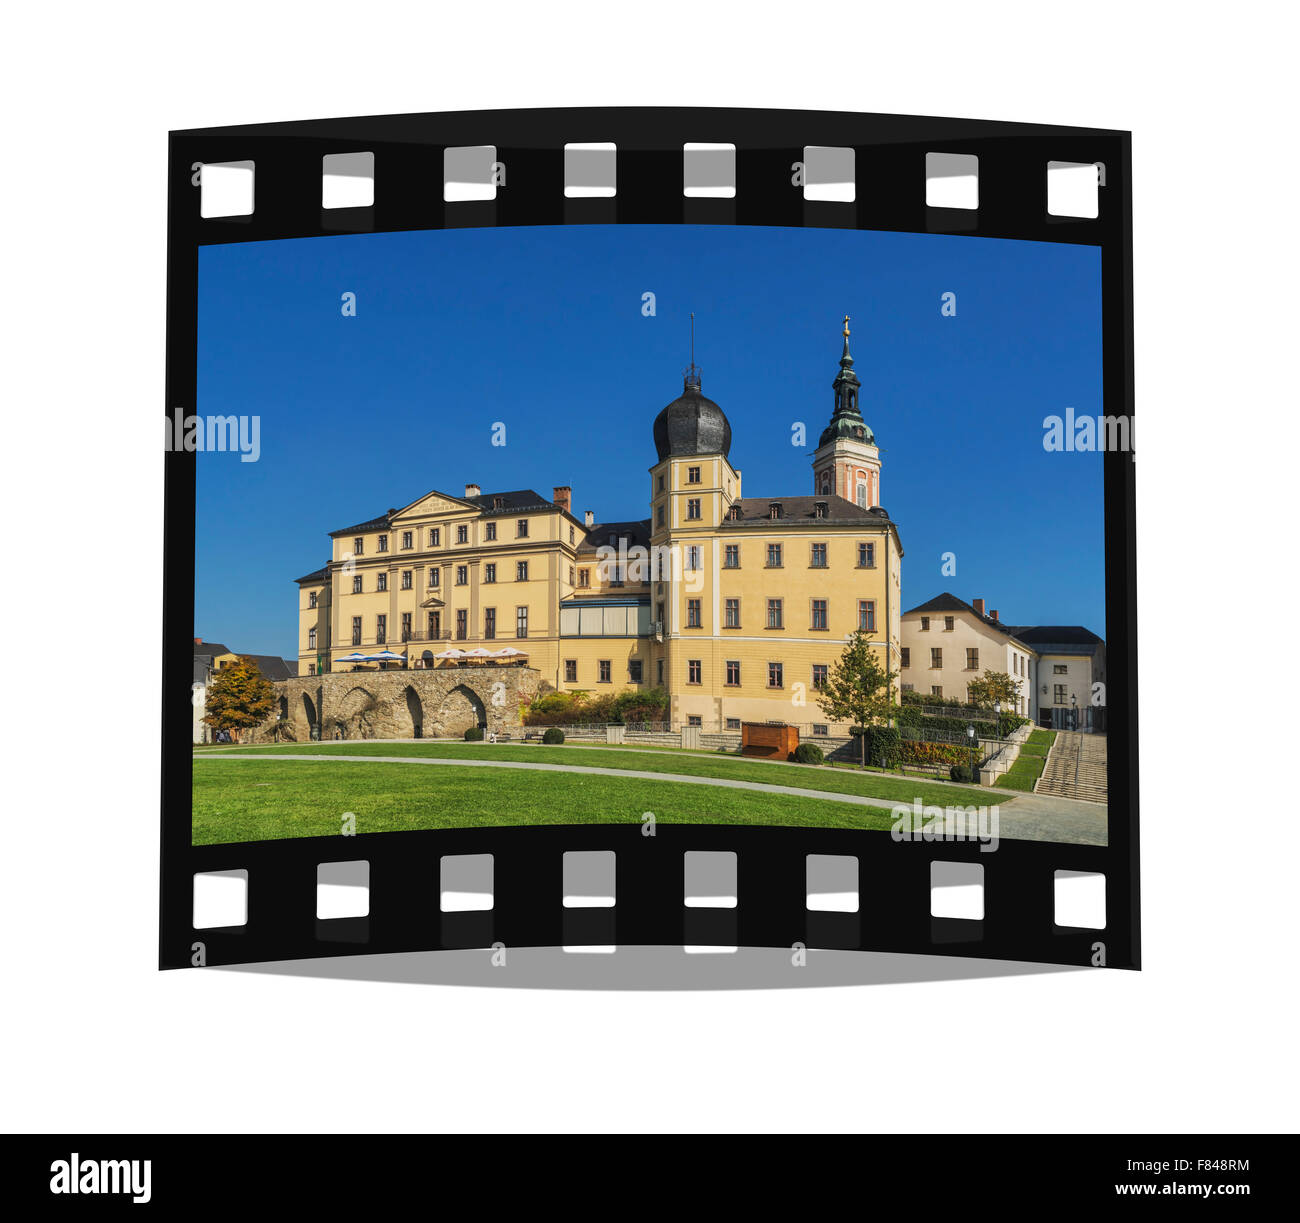 The Lower Castle is situated on the banks of the White Elster, next to the St. Marys Church, Greiz, Thuringia, Germany, Europe Stock Photo